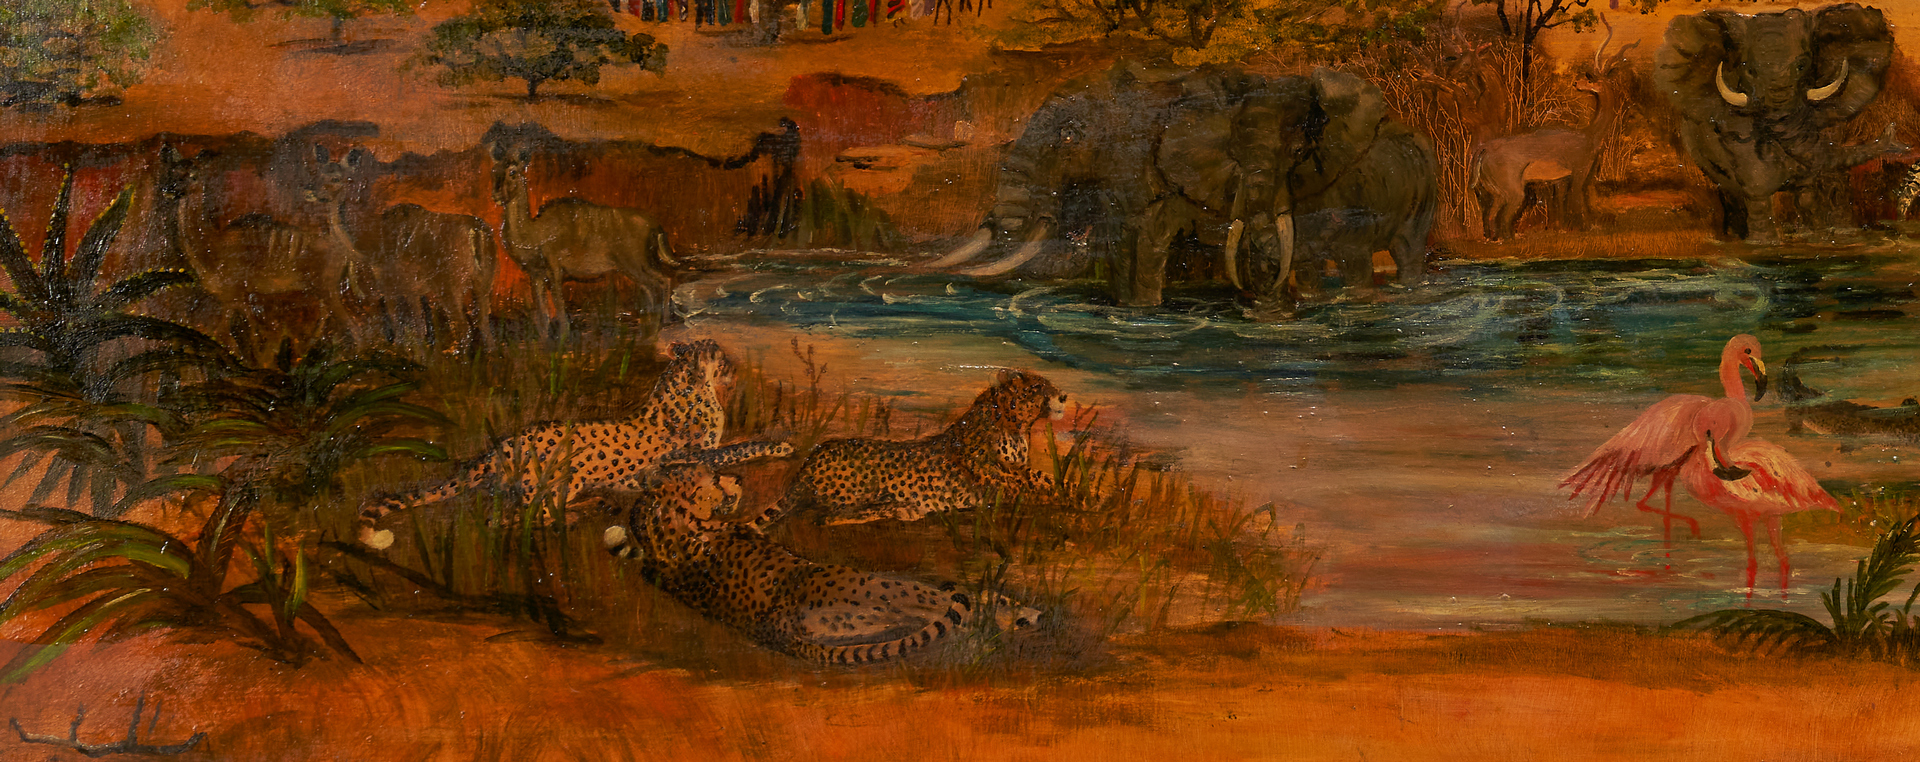 Lot 204: Monumental Helen LaFrance Double-Sided Painting: Africa & Fox Hunter